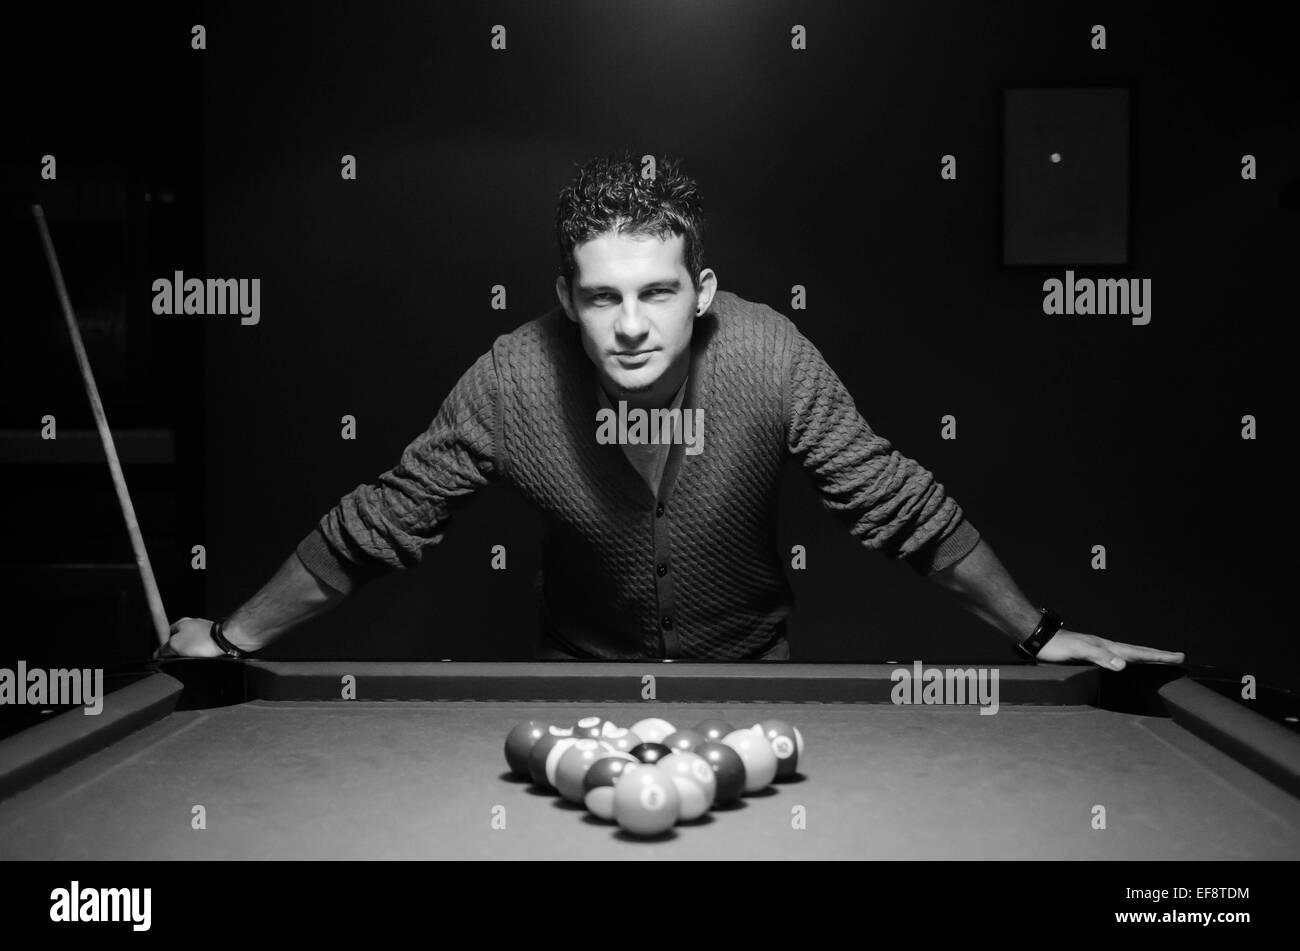 Portrait of snooker player Stock Photo